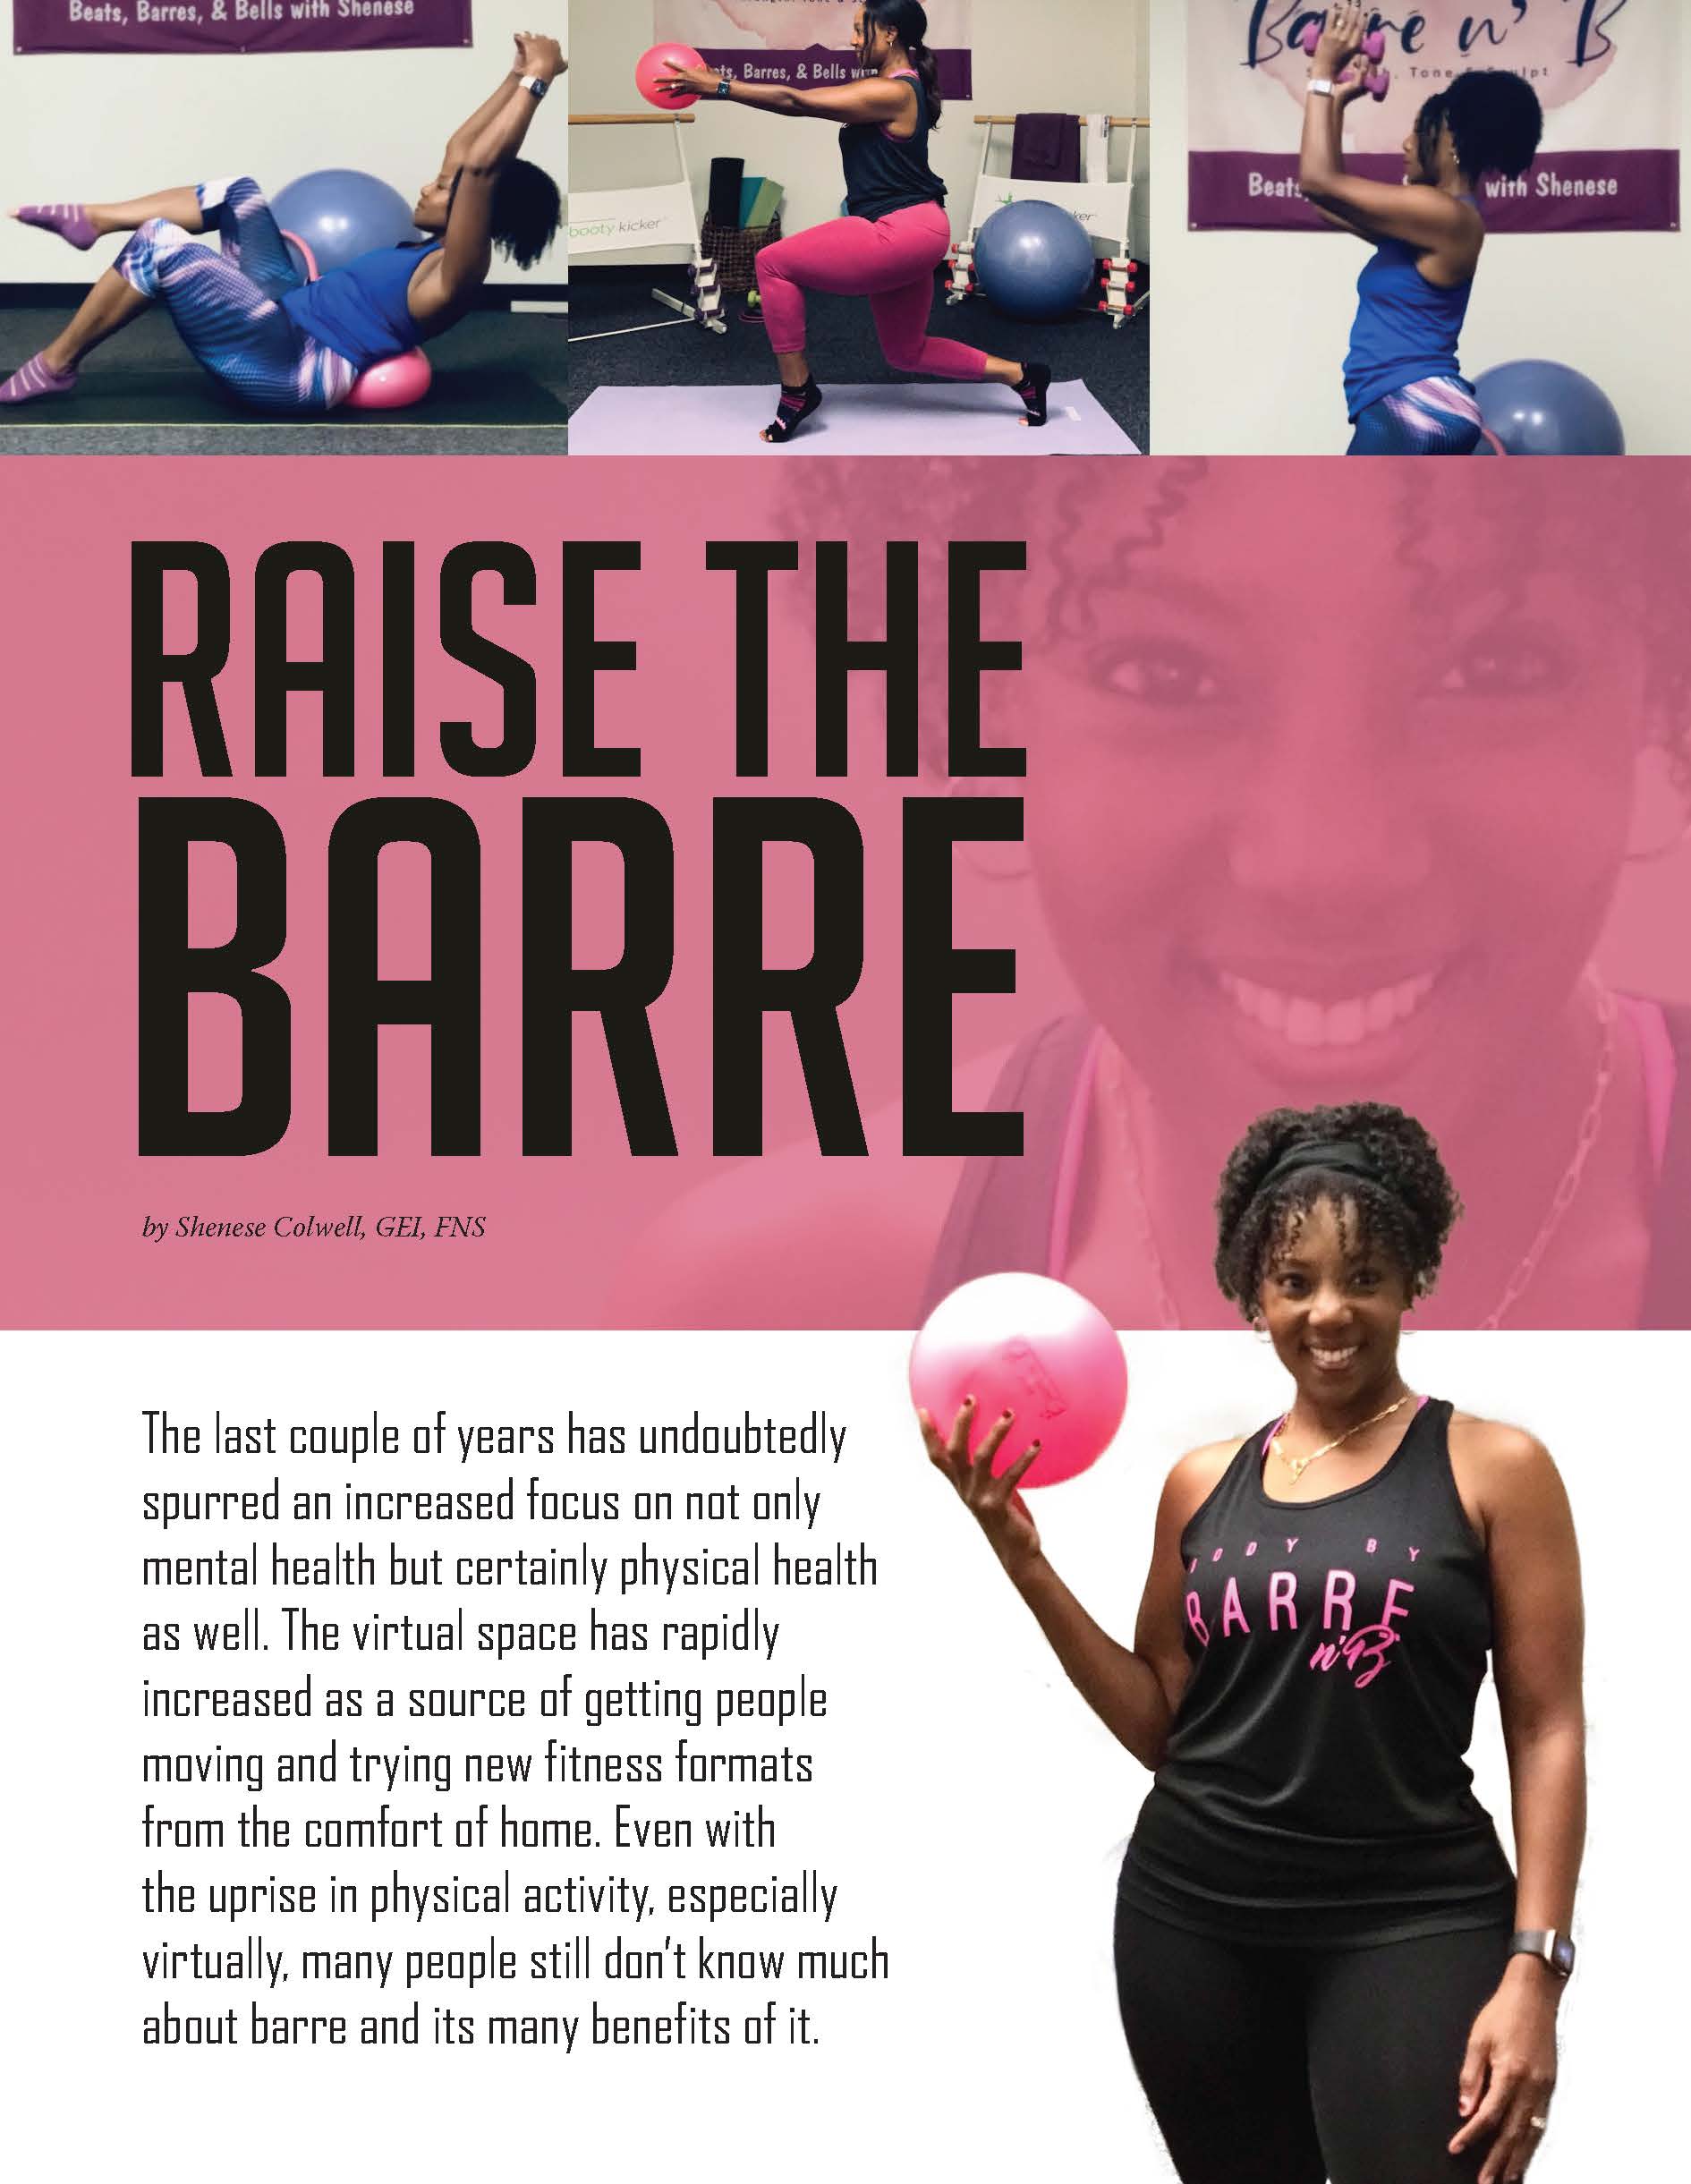 Raise the Barre - Obesity Action Coalition